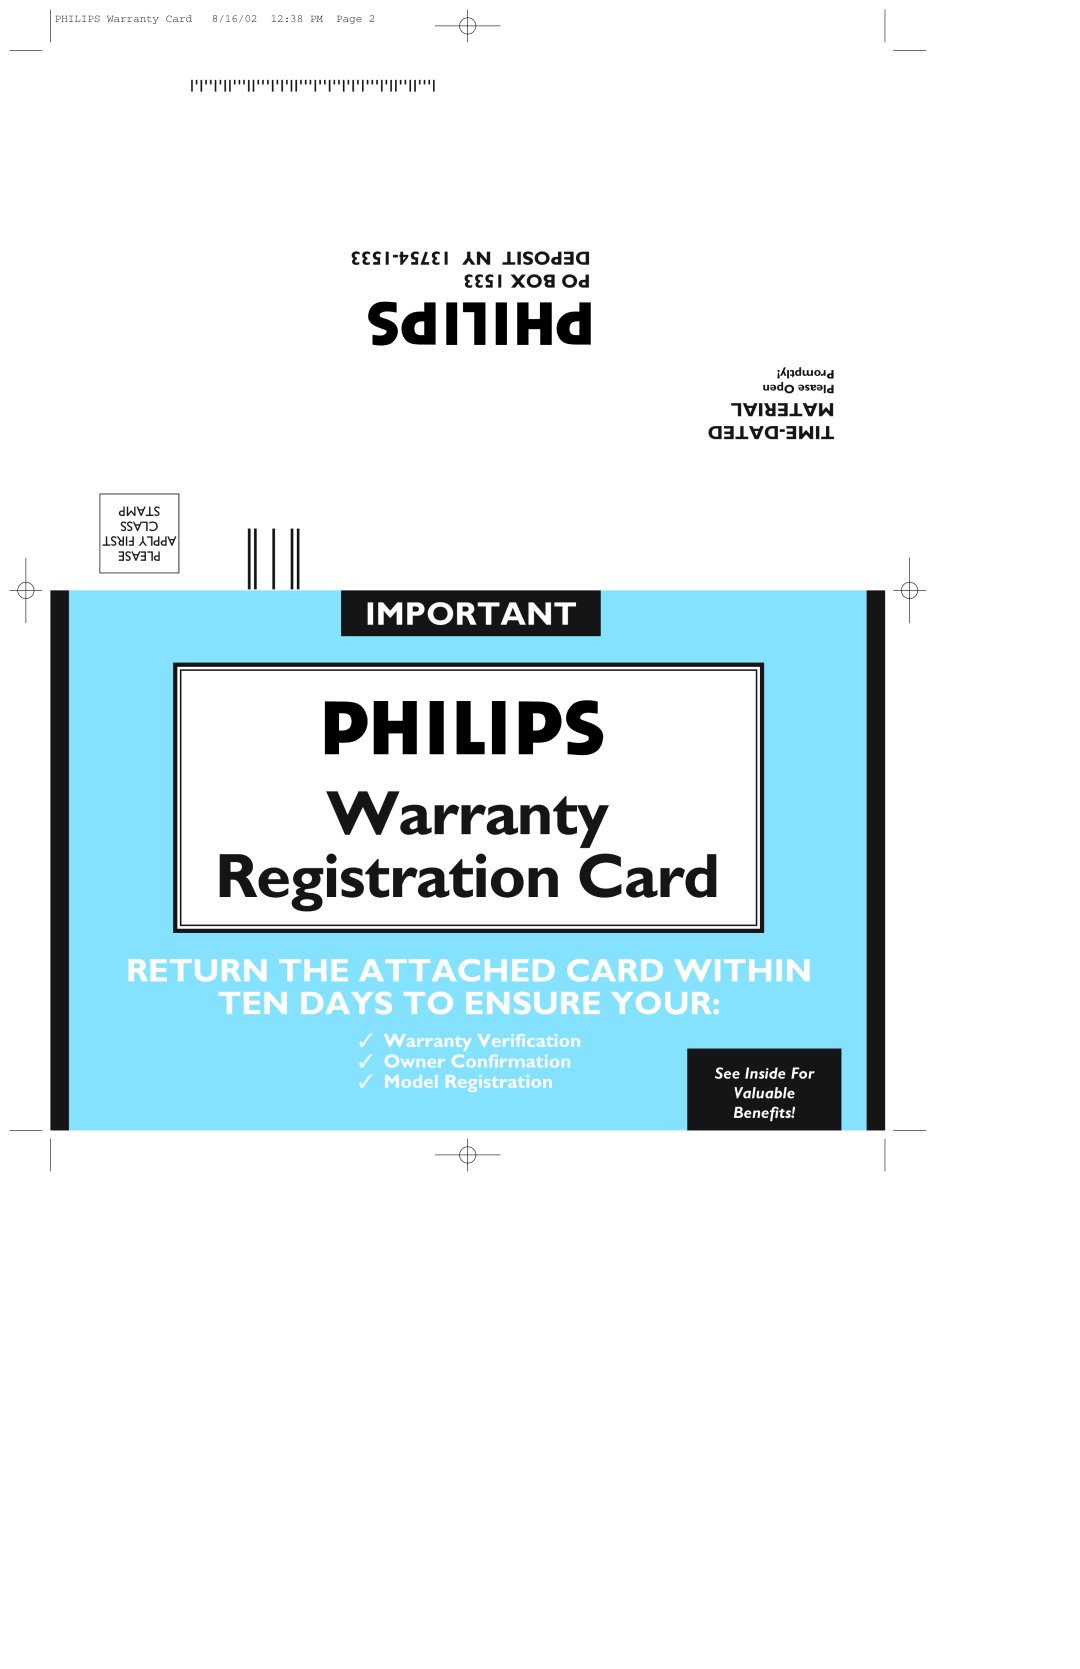 Philips 109F 1533-13754NY DEPOSIT, Box Po, Material, Dated-Time, Warranty, Registration Card, Ten Days To Ensure Your 